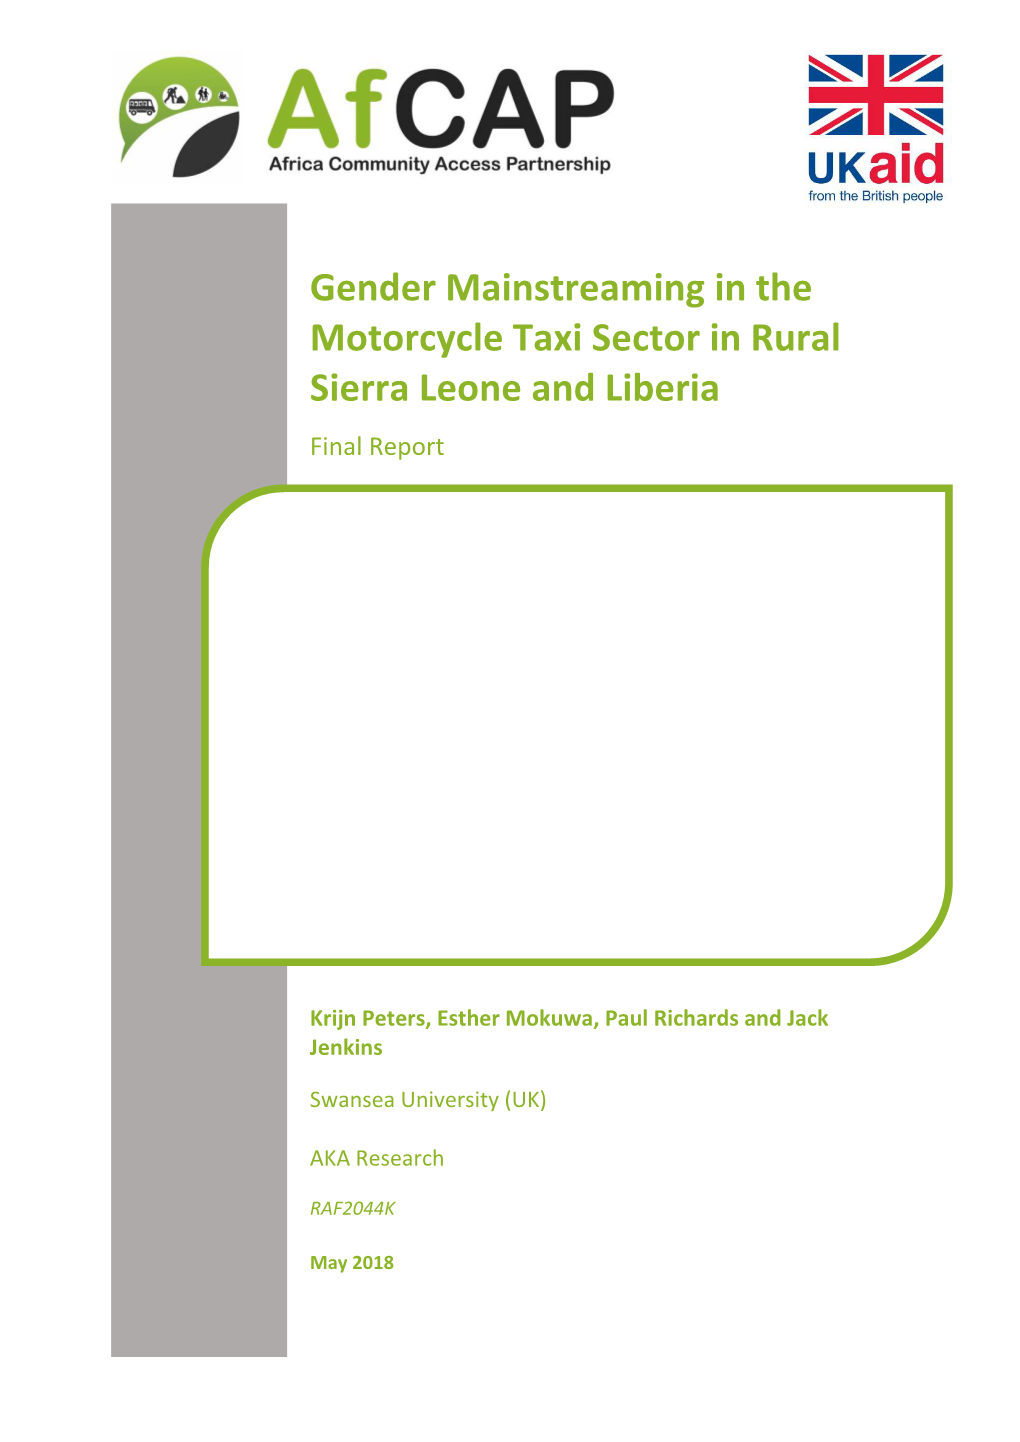 Gender Mainstreaming in the Motorcycle Taxi Sector in Rural Sierra Leone and Liberia Final Report